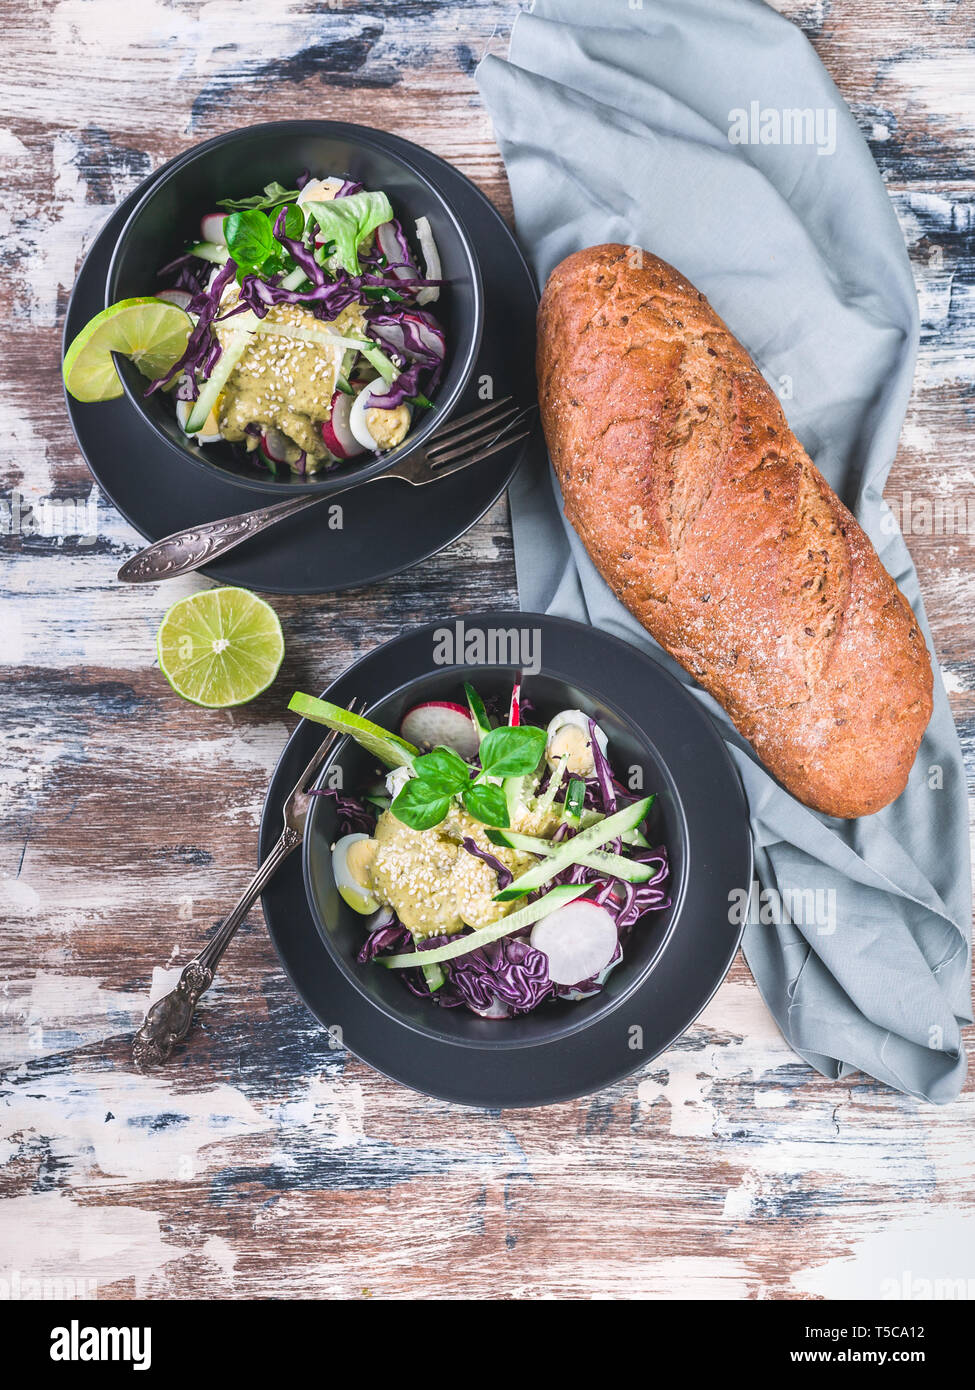 Top view italian ciabatta and fresh vegetable salad in a dark bowl. Salad with radish, red cabbage, cucumber, pesto and sesame seeds. Stock Photo